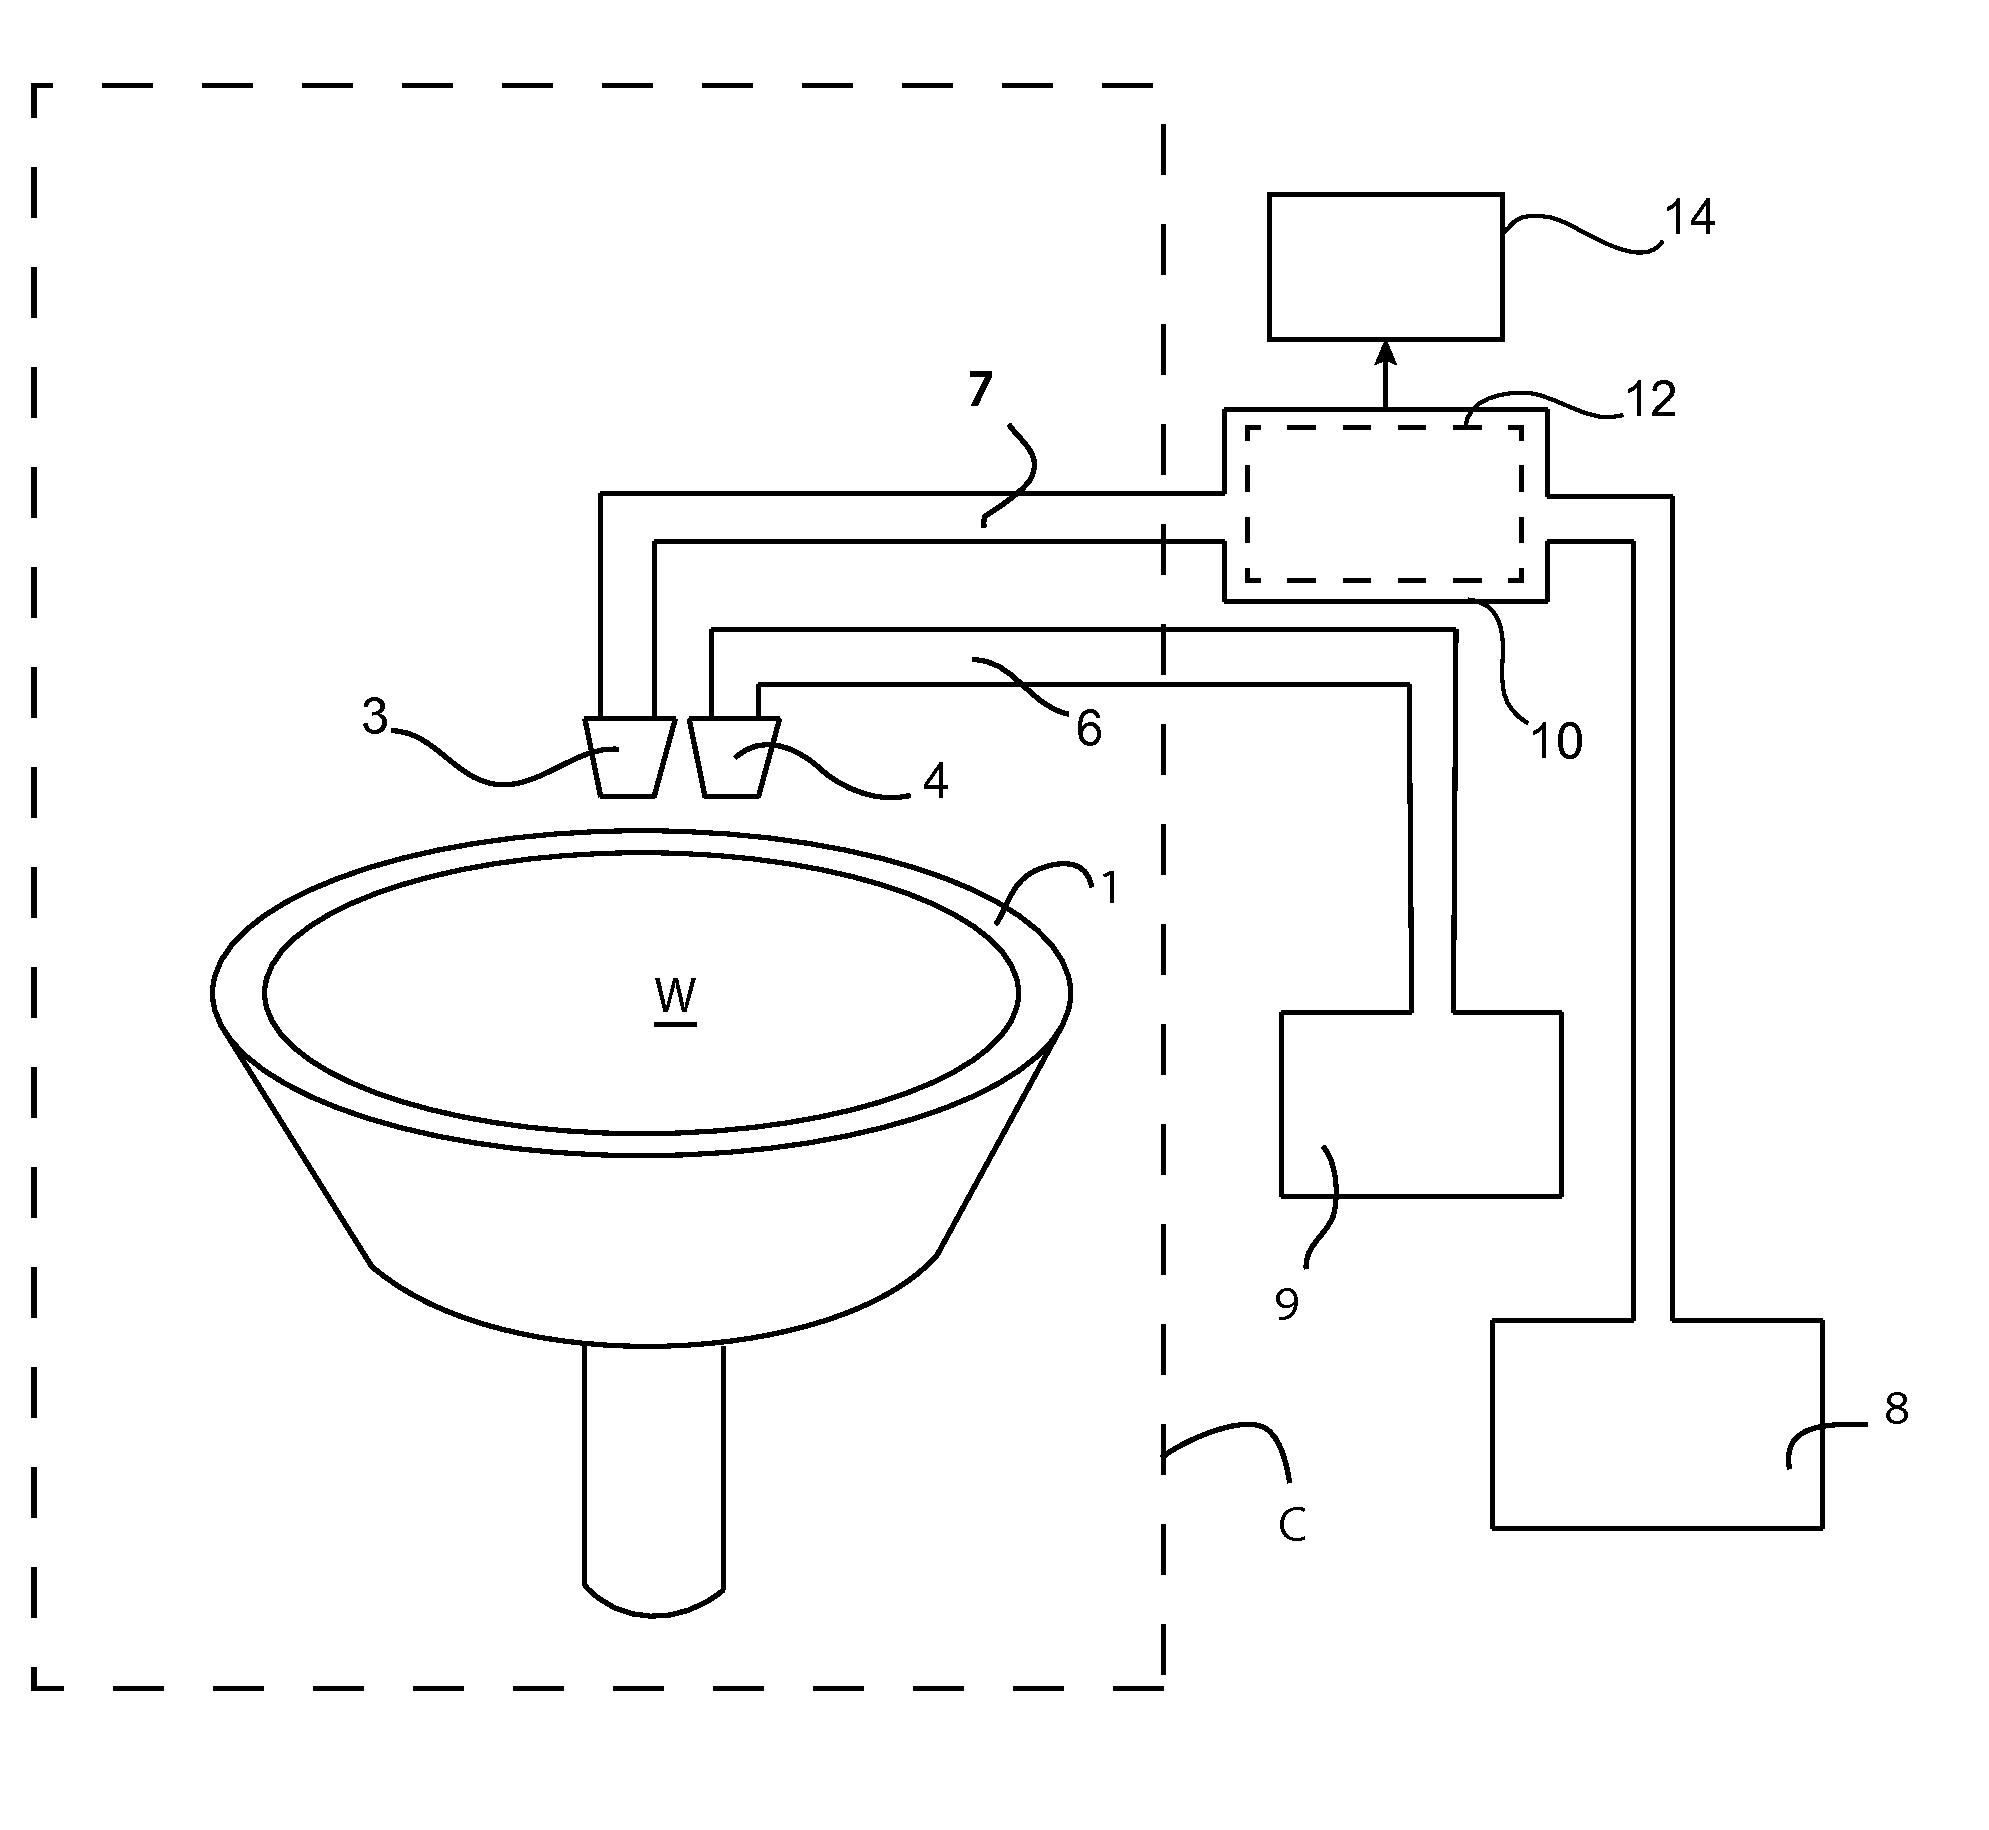 Method and apparatus for liquid treatment of wafer shaped articles